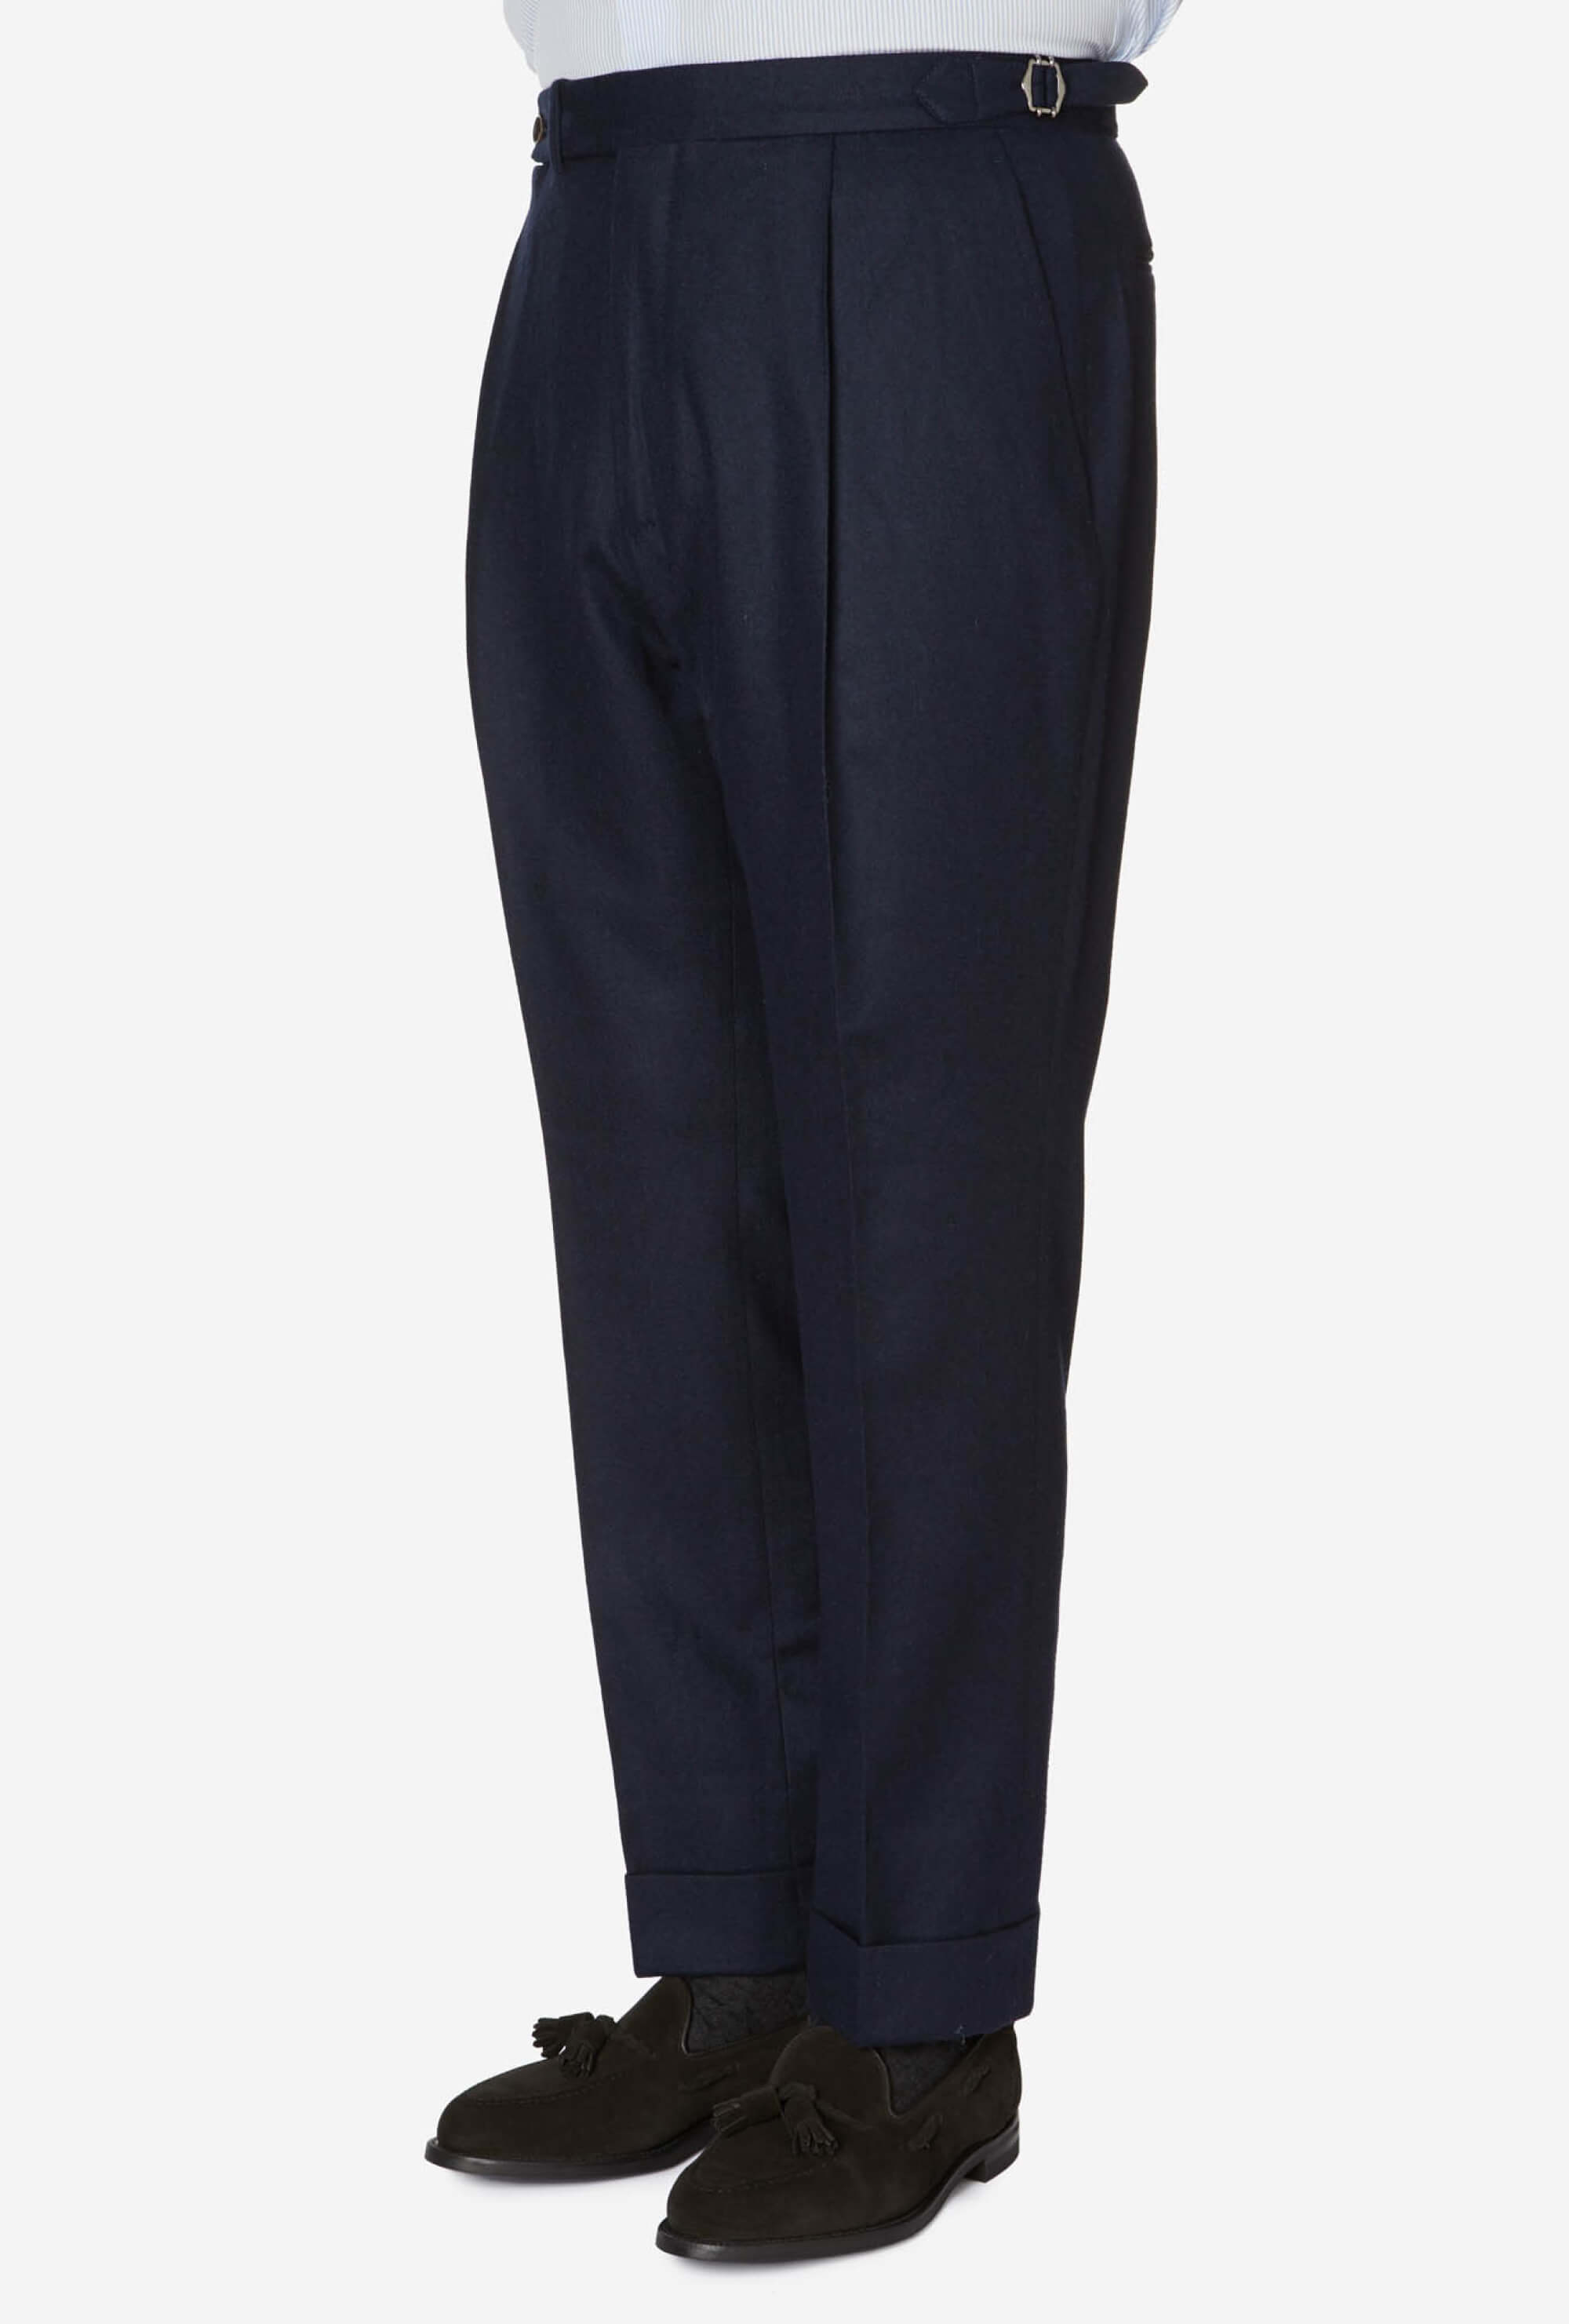 Parages Tom Flannel Pants - Navy | Garmentory